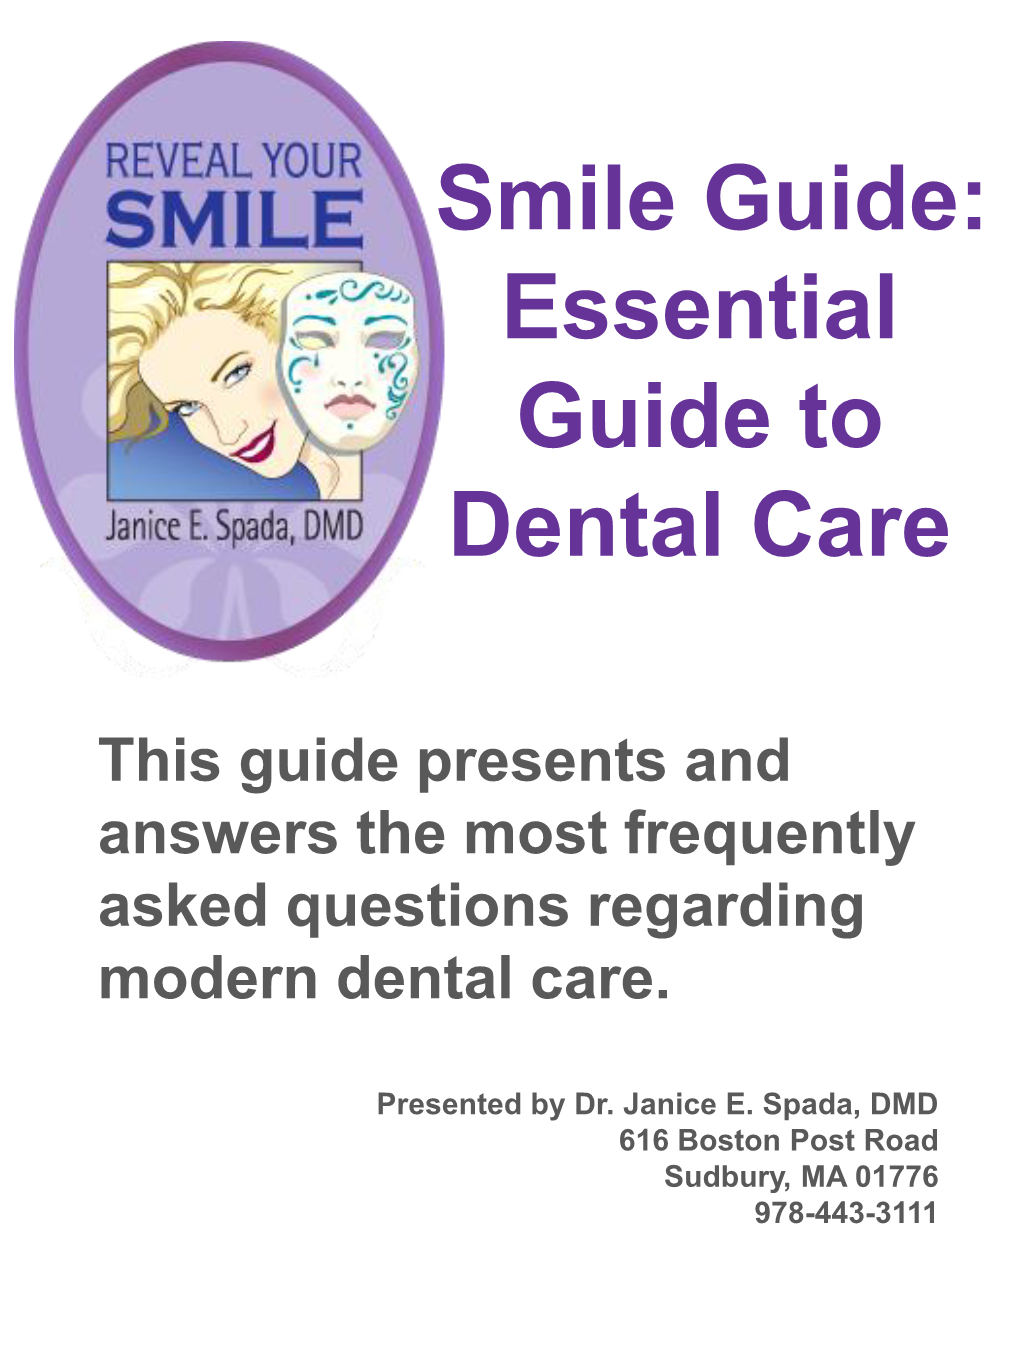 Smile Guide: Essential Guide to Dental Care